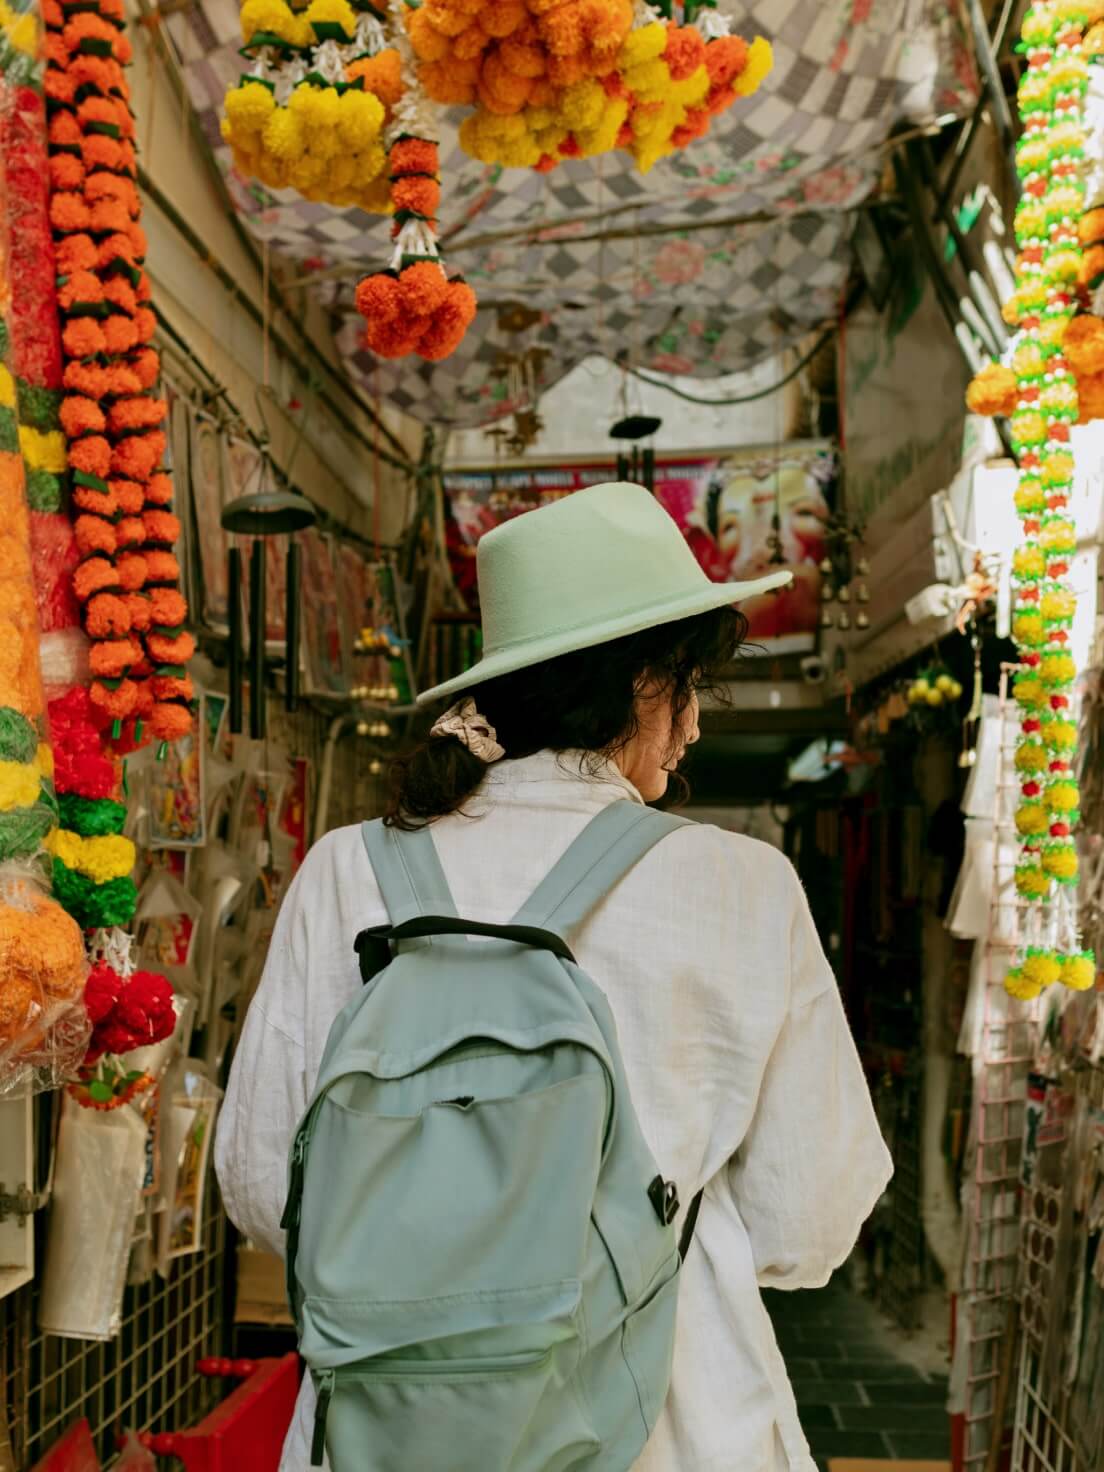 Woman travelling through a market